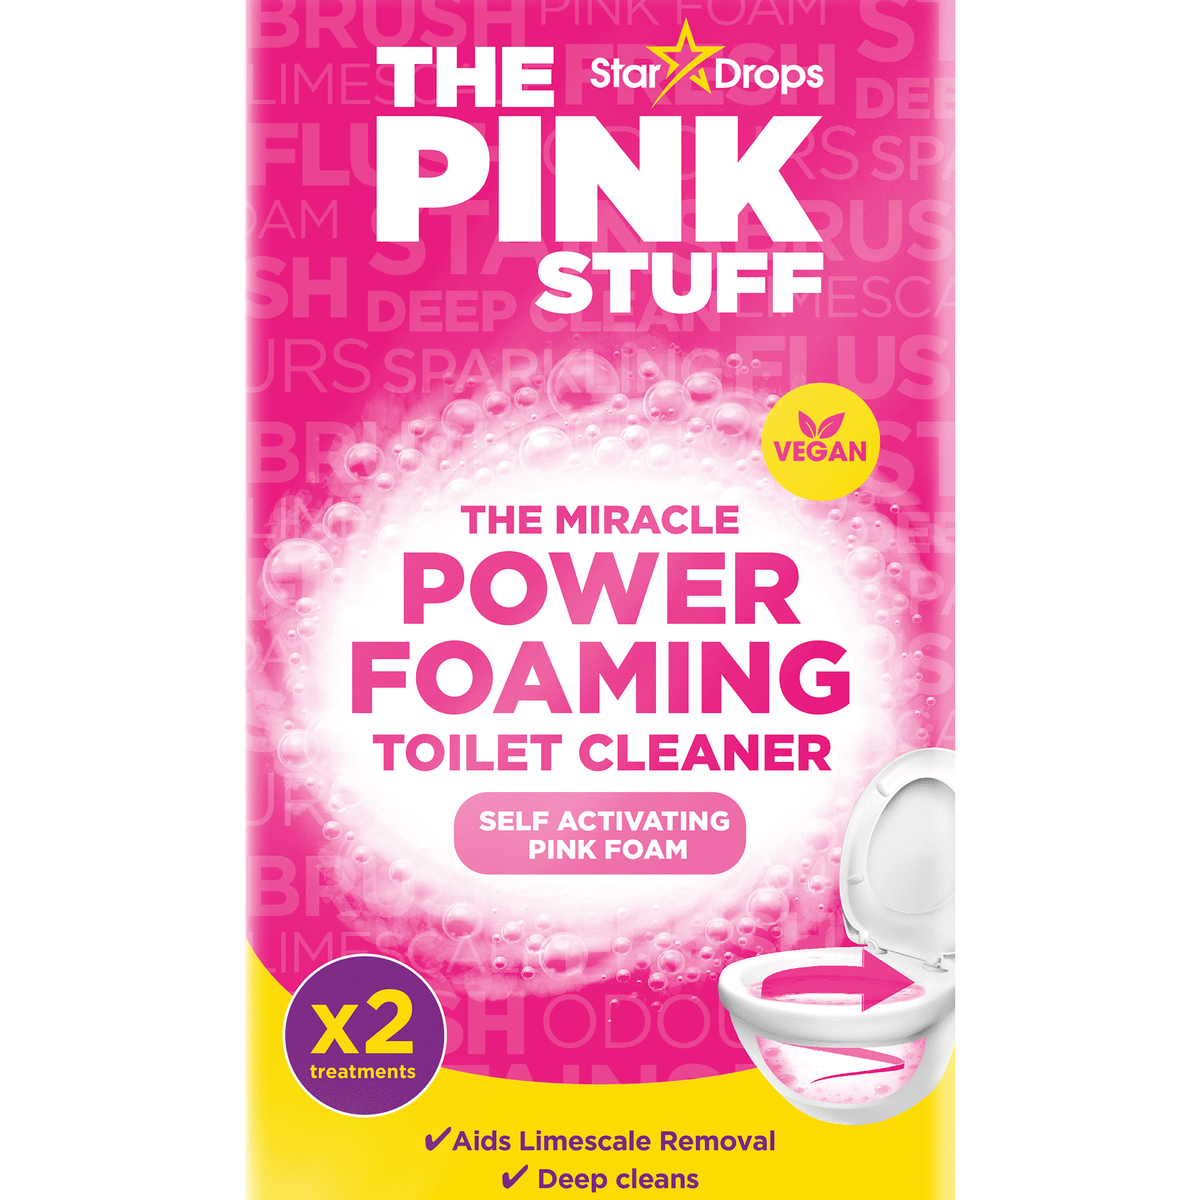 The Pink Stuff, Miracle Cleaning Paste, All-Purpose Cleaner, 17.63